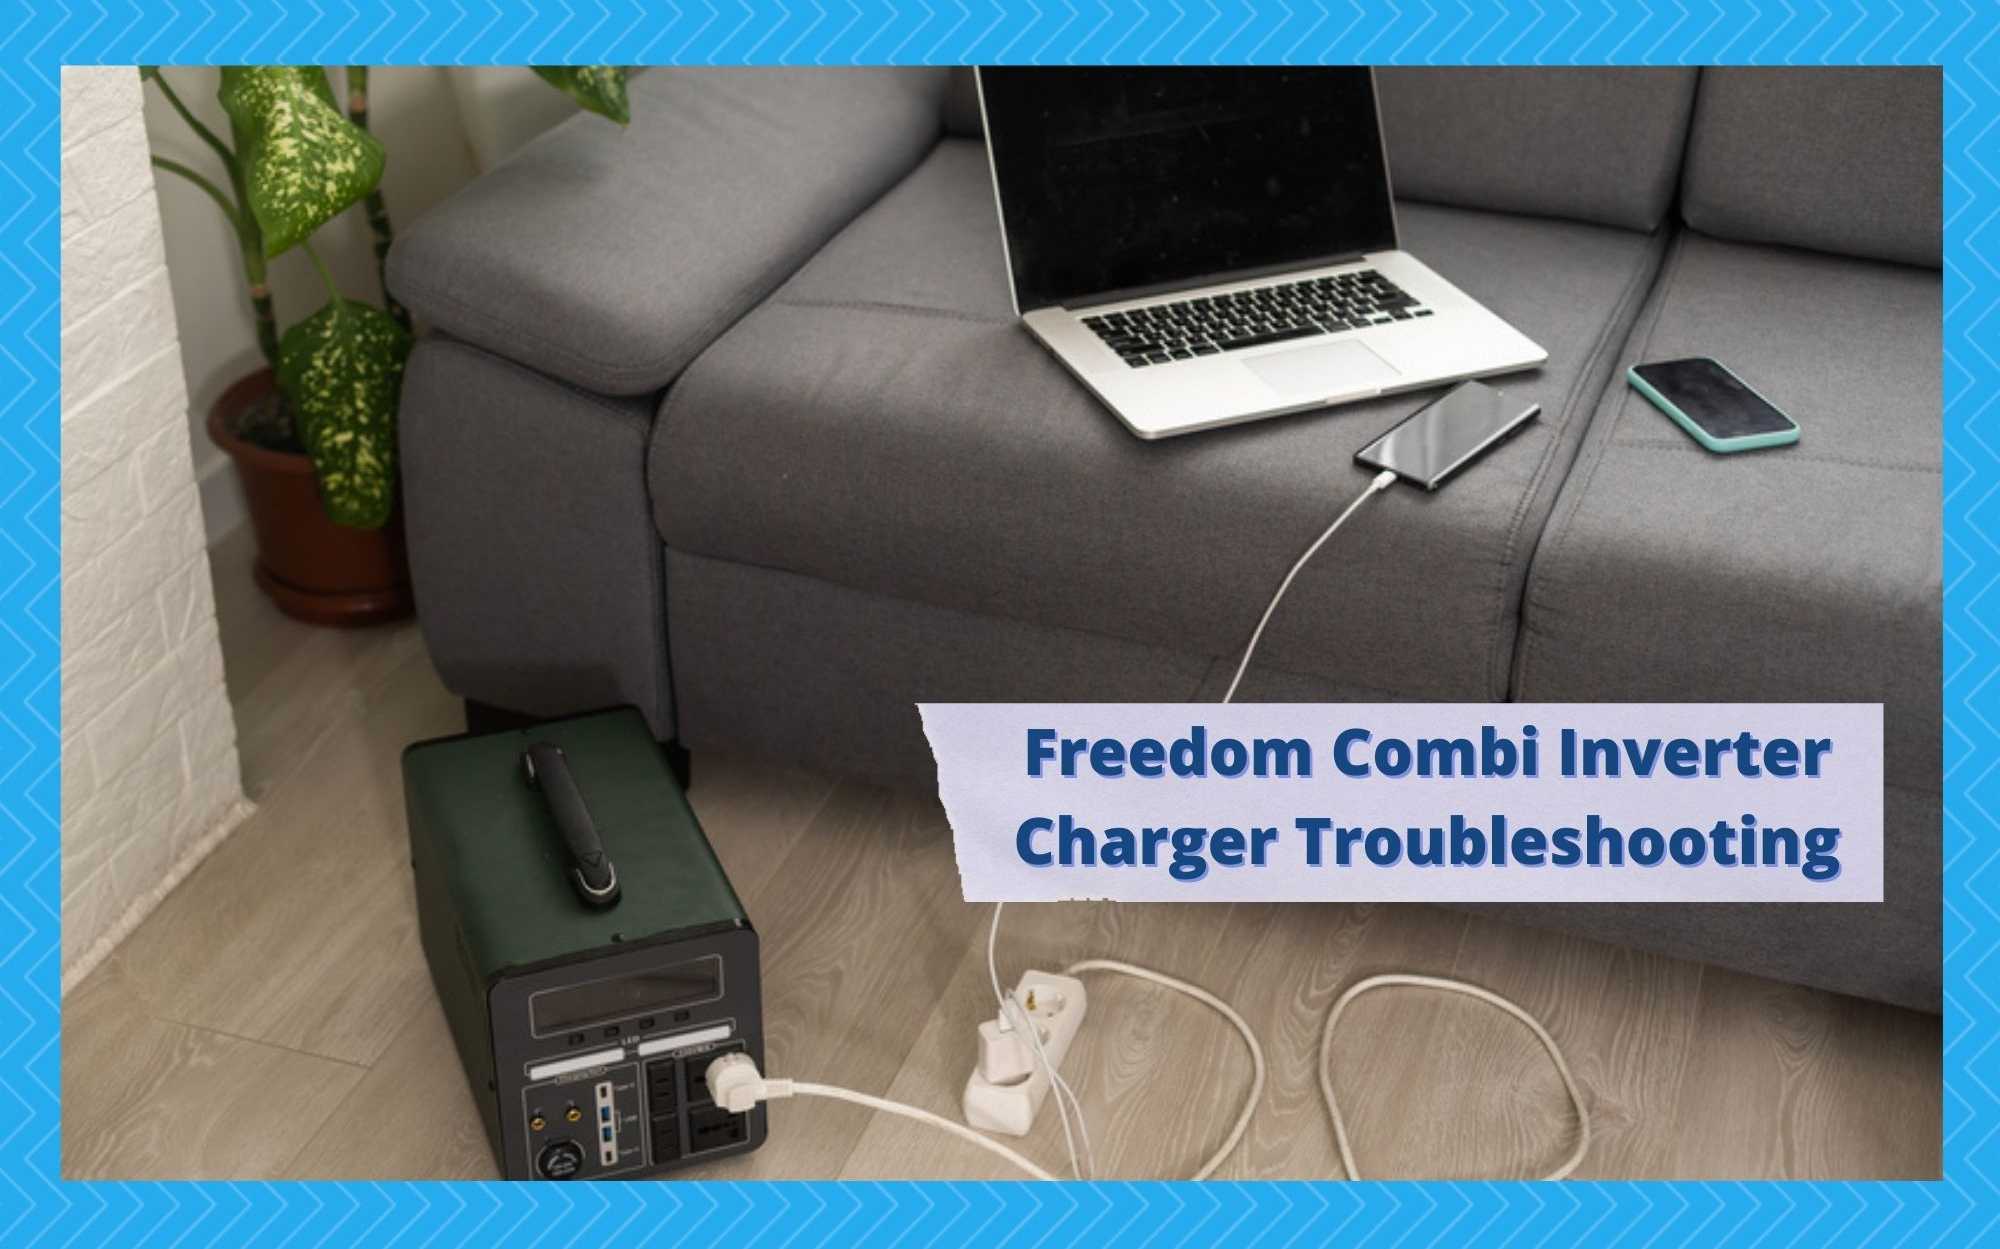 Freedom Combi Inverter Charger Troubleshooting